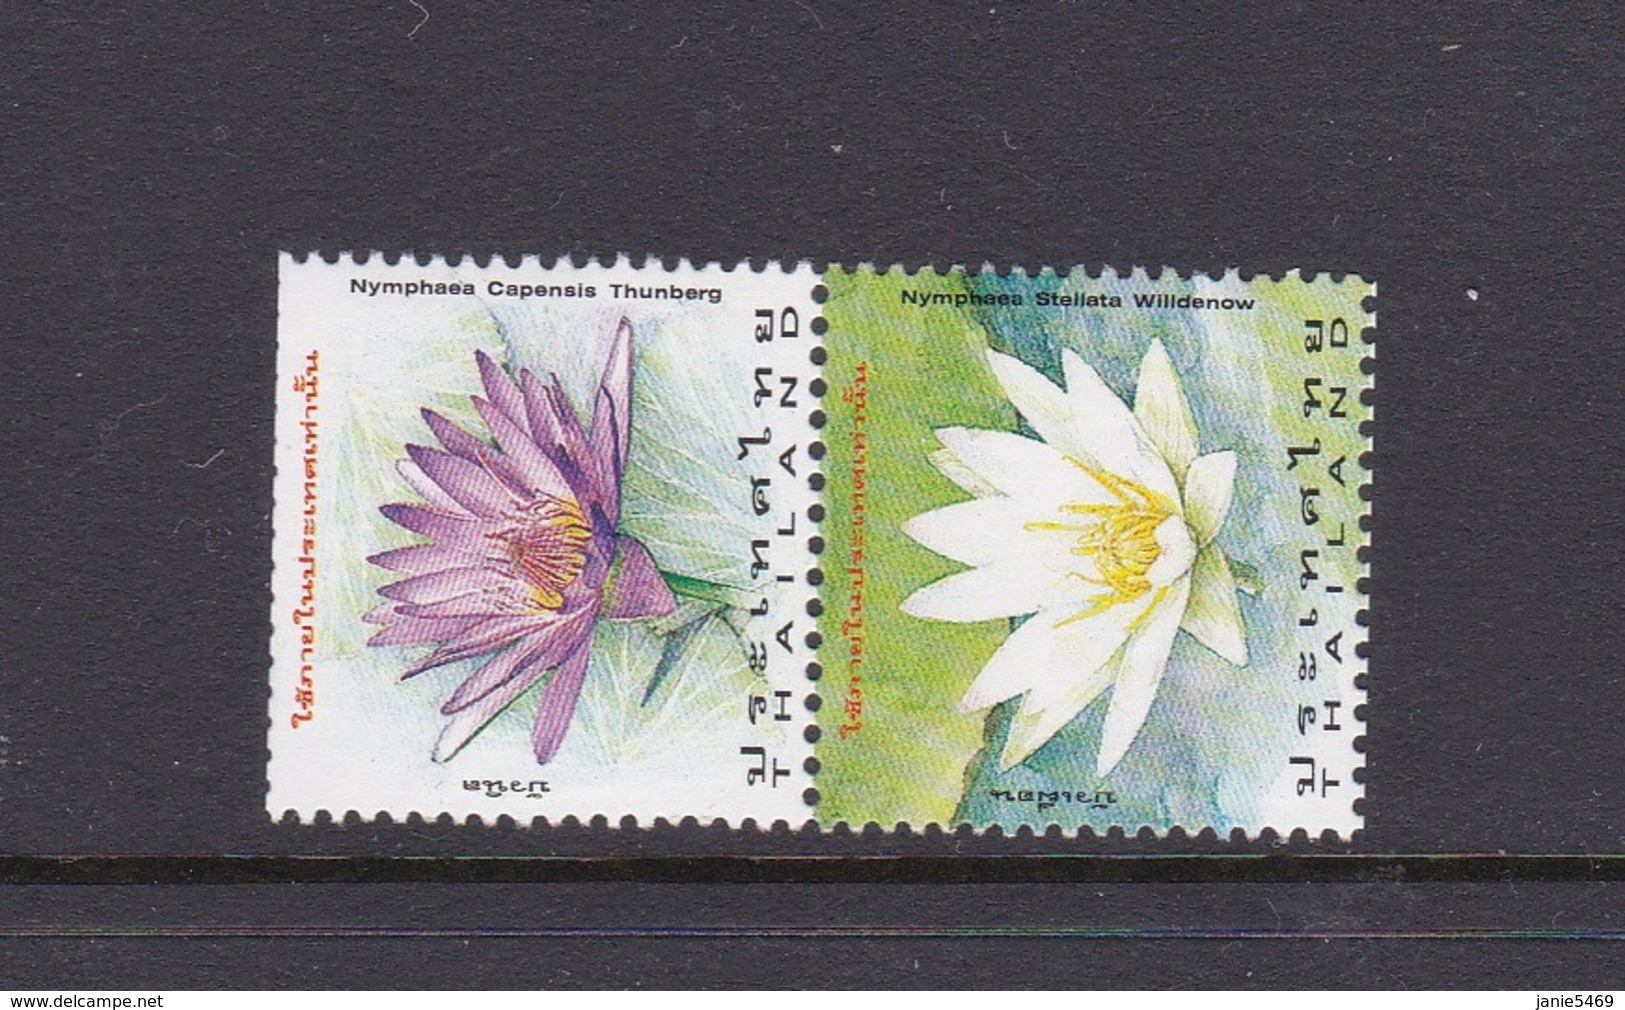 Thailand Scott 1755A-1755B 1997 Flowers Booklet Pair,mint Never Hinged - Thailand